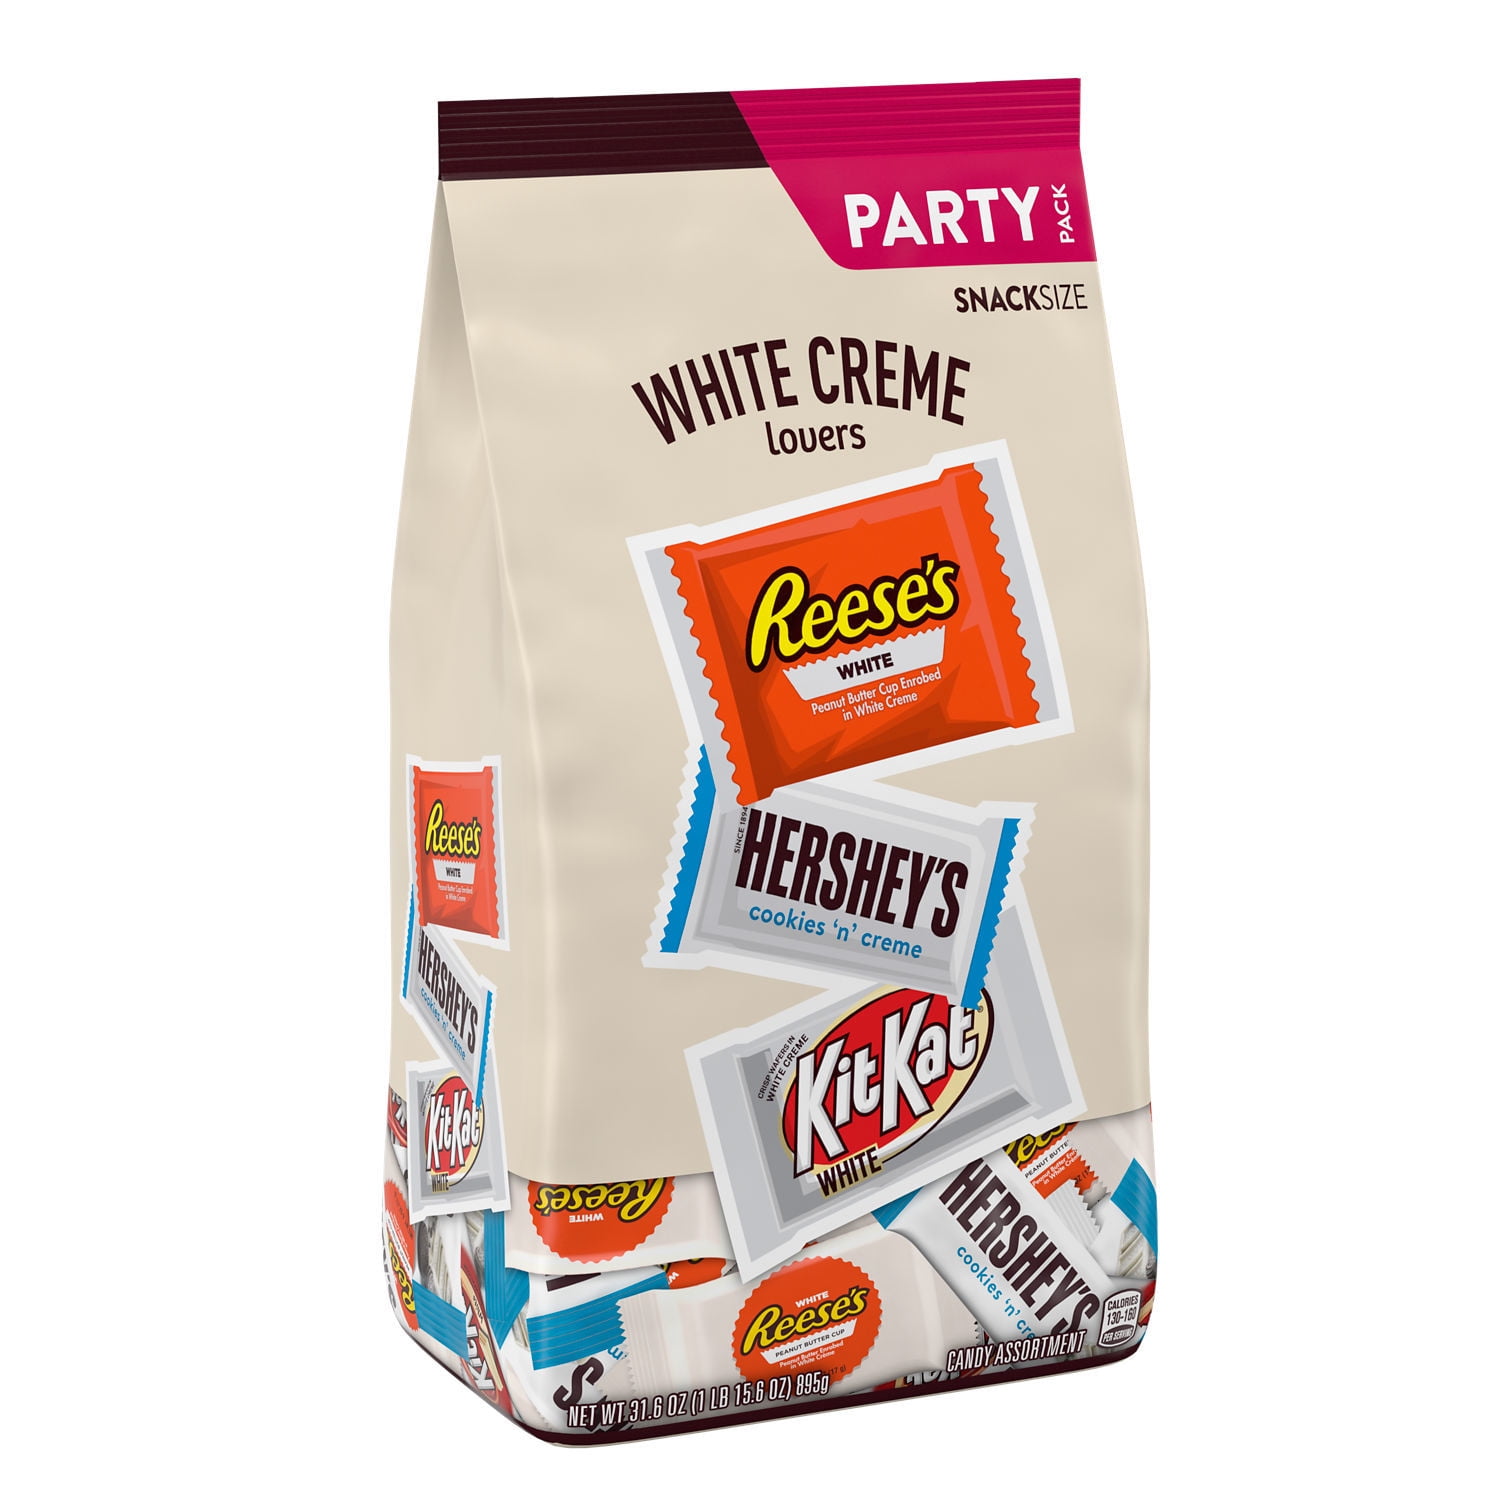 Reese's, Hershey's and Kit Kat, White Creme Lovers White Creme Assortment Snack Size Candy, Individually Wrapped, 31.6 oz, Bulk Party Pack